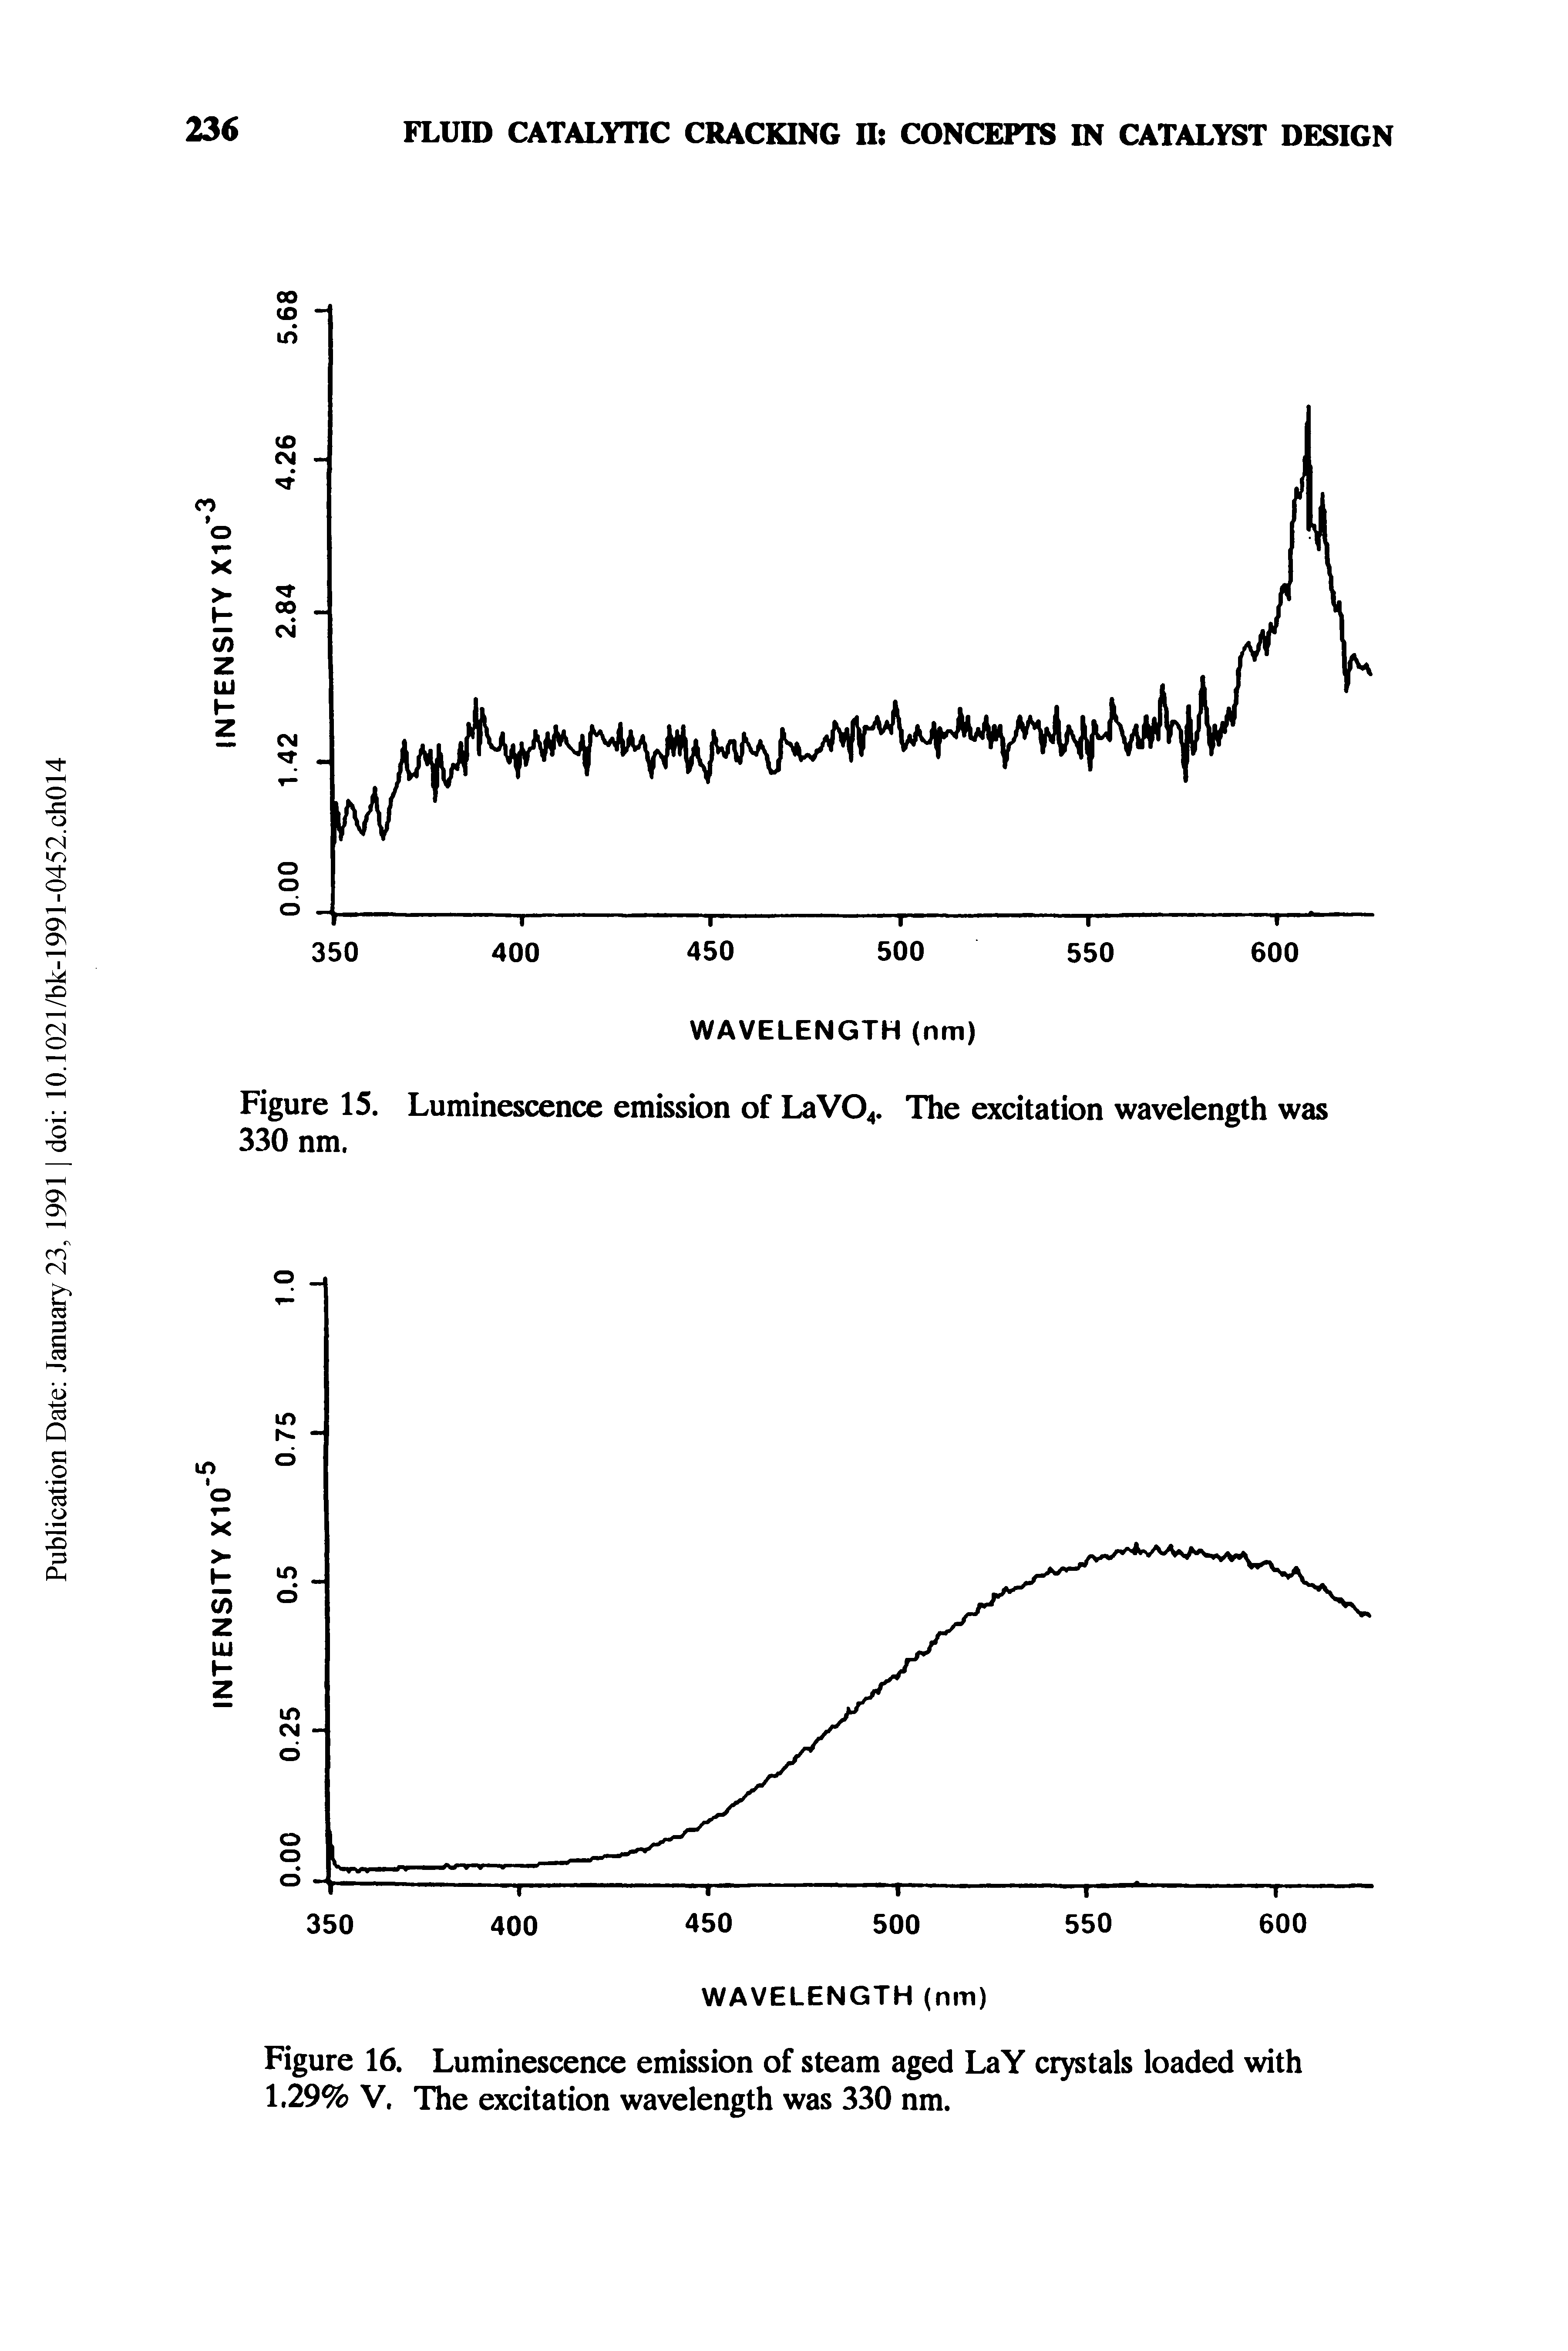 Figure 16. Luminescence emission of steam aged LaY crystals loaded with 1.29% V. The excitation wavelength was 330 nm.